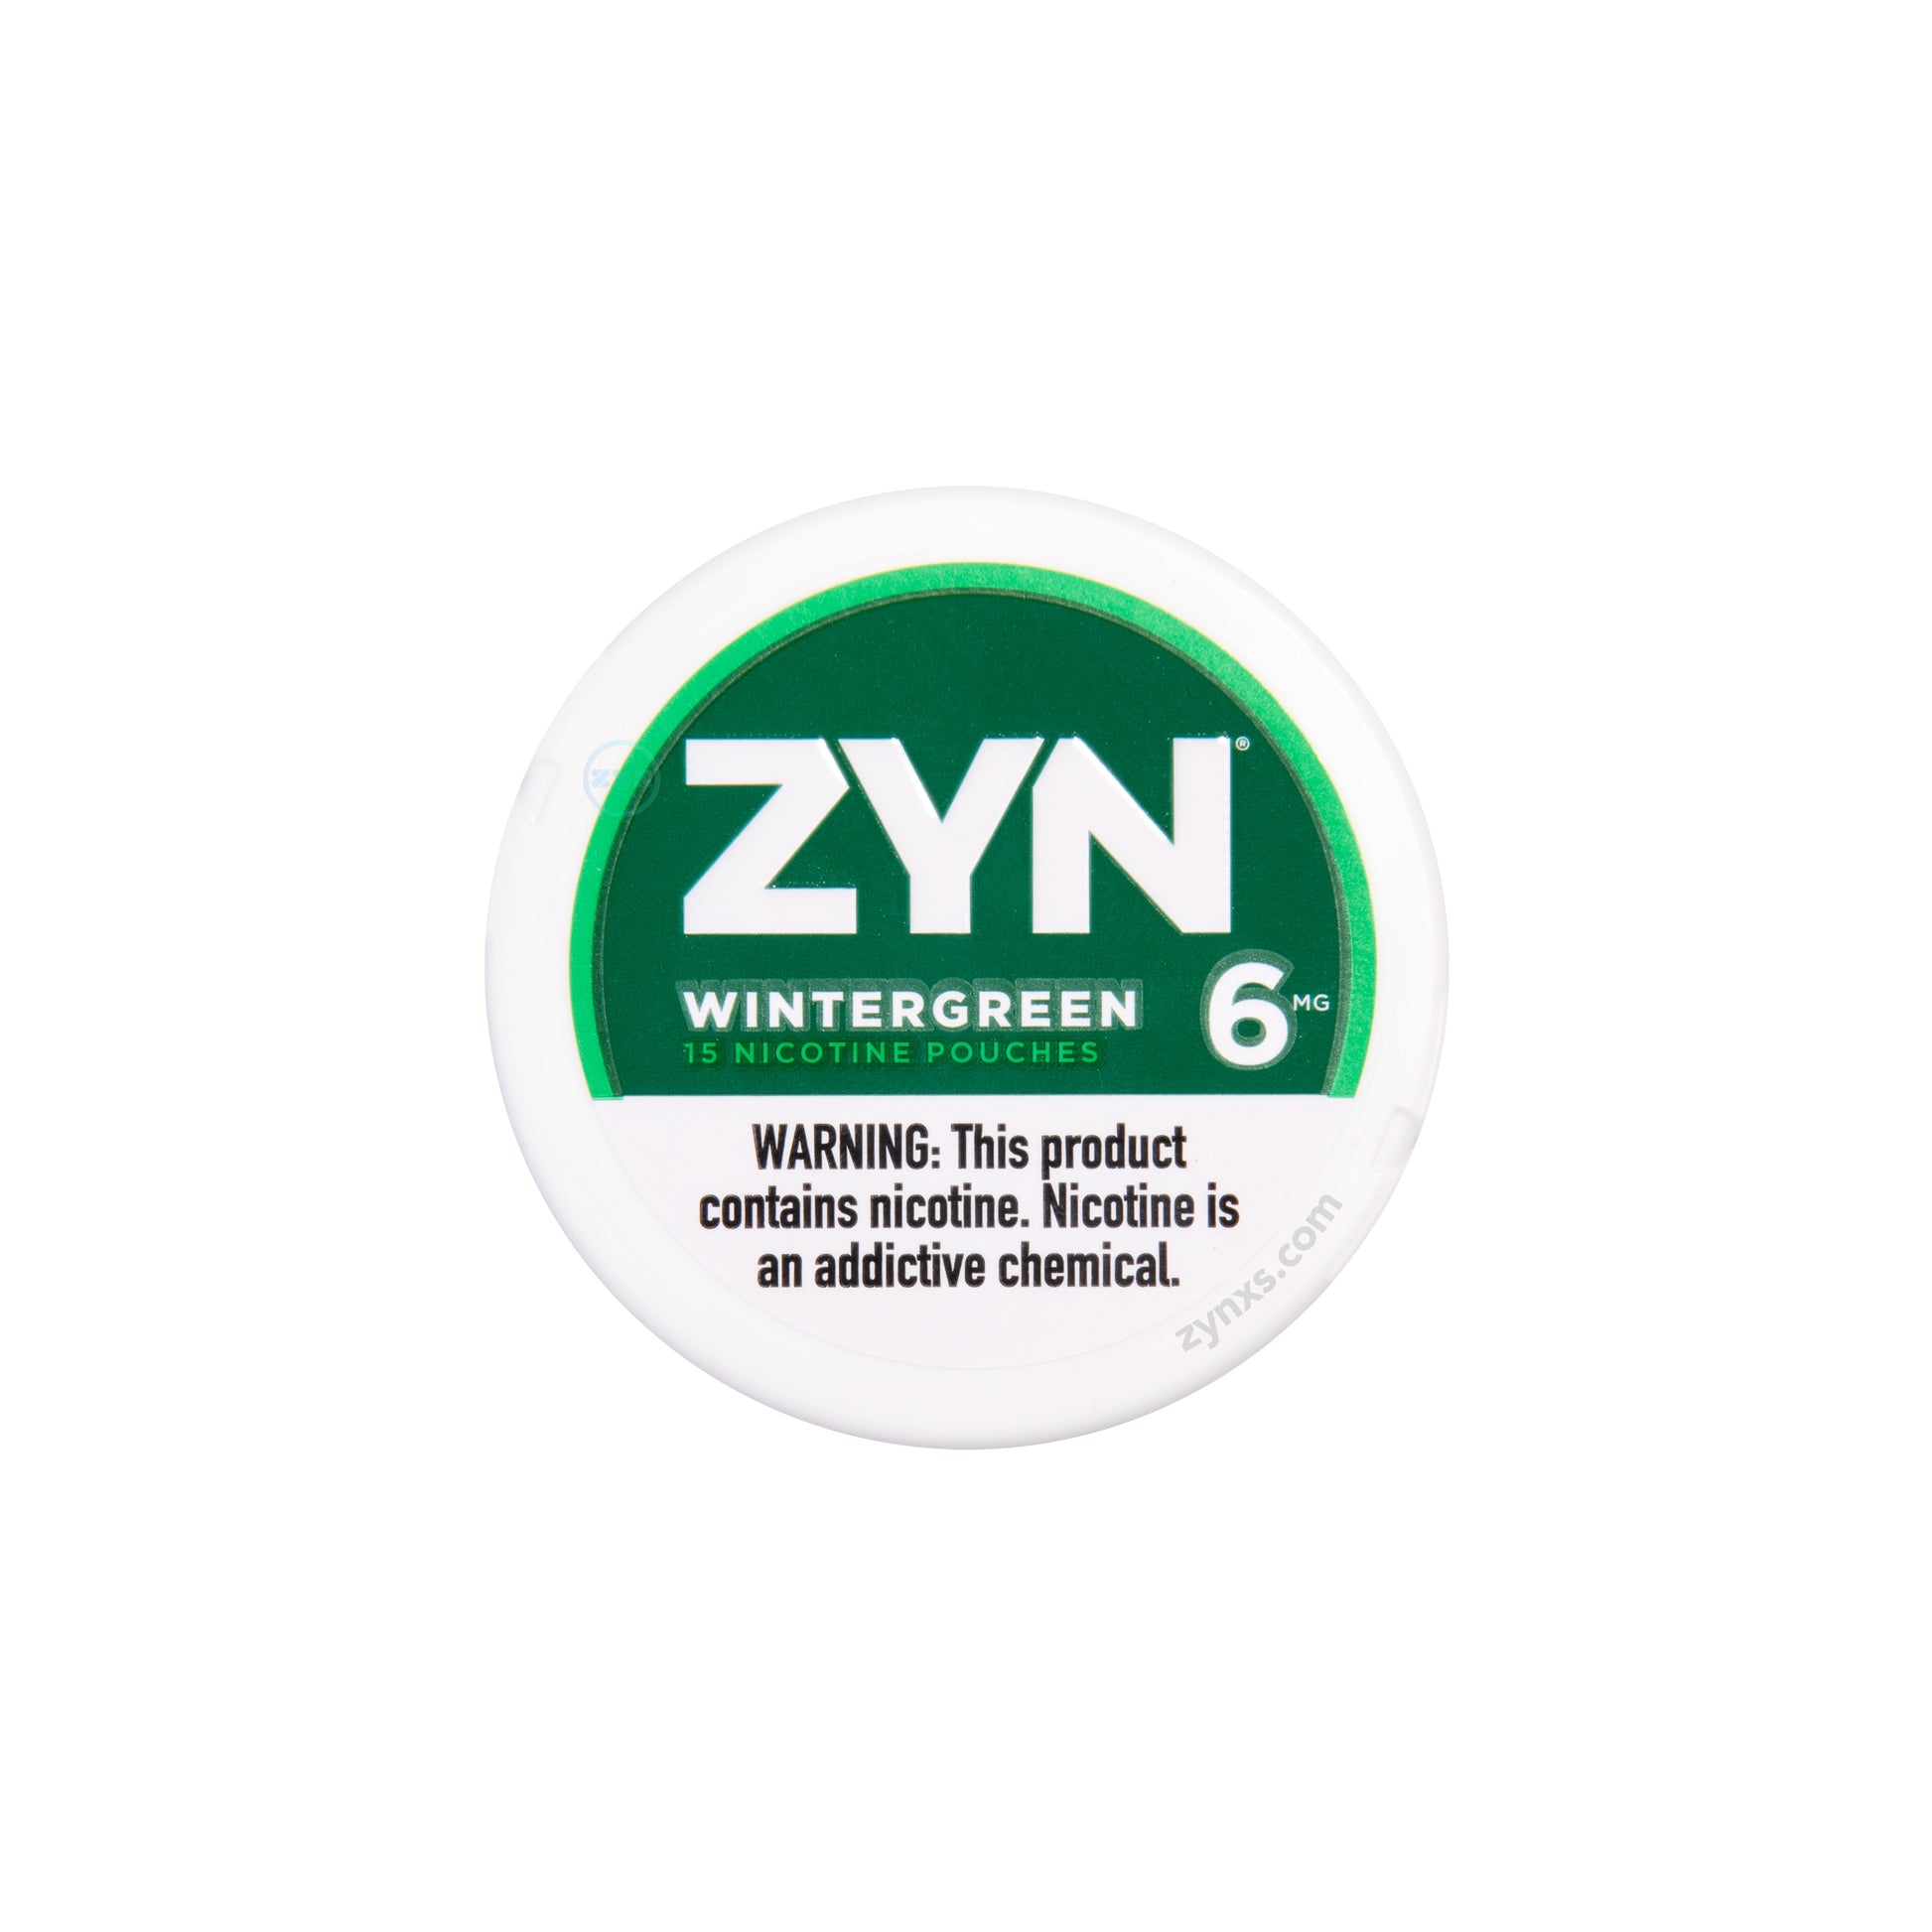 Zyn Wintergreen 6 MG nicotine pouches come in striking packaging that perfectly encapsulates the essence of the flavor within.